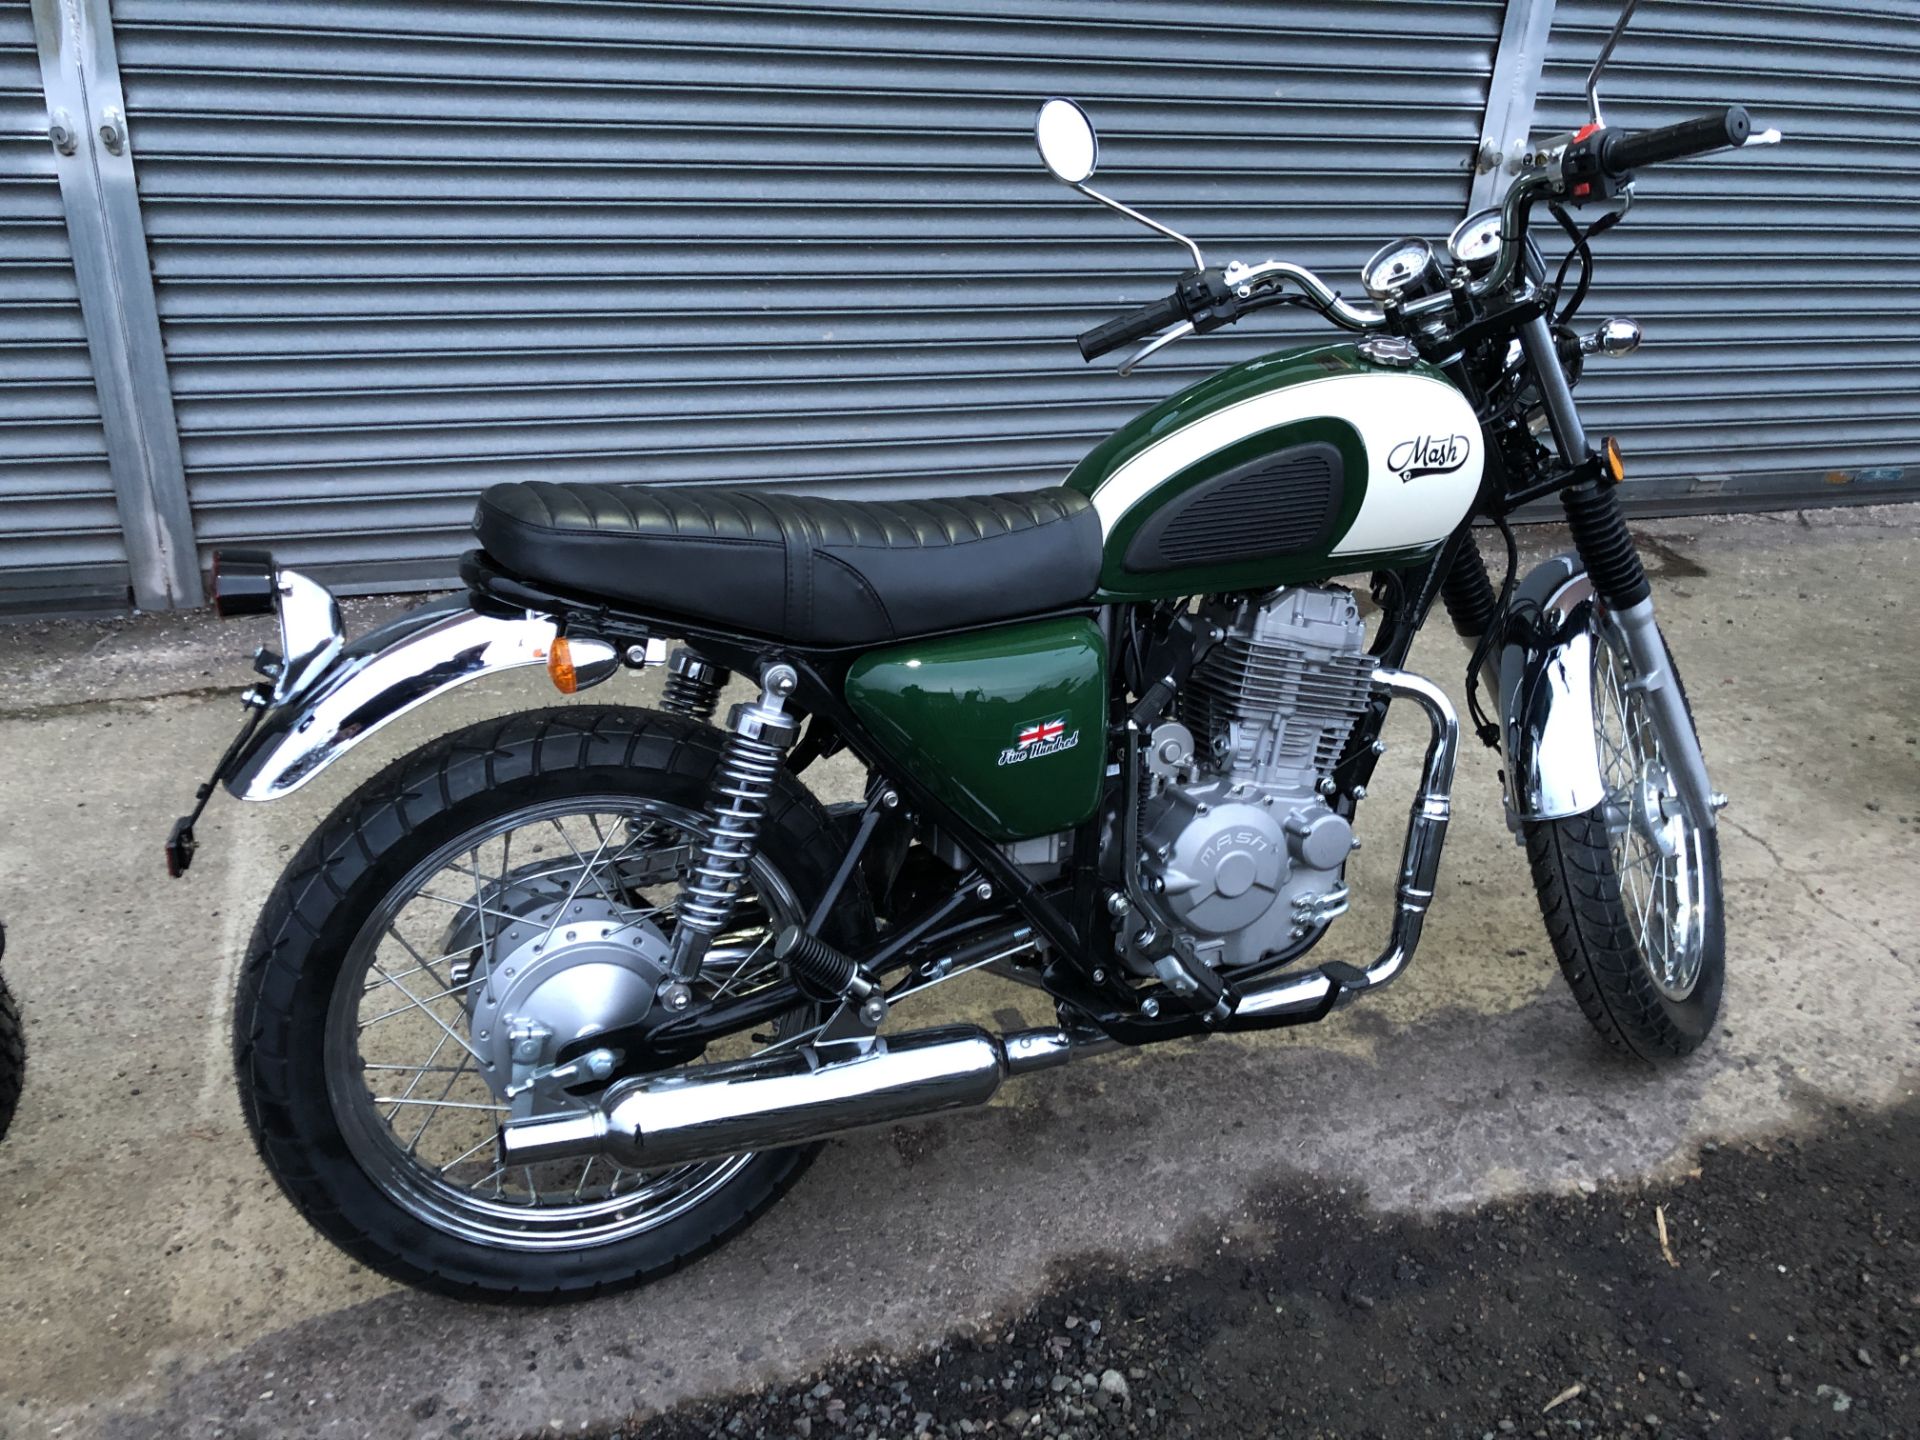 Mash Roadstar 400 As New Condition was collected from Main Dealer after the Mash Importer in the - Image 4 of 17